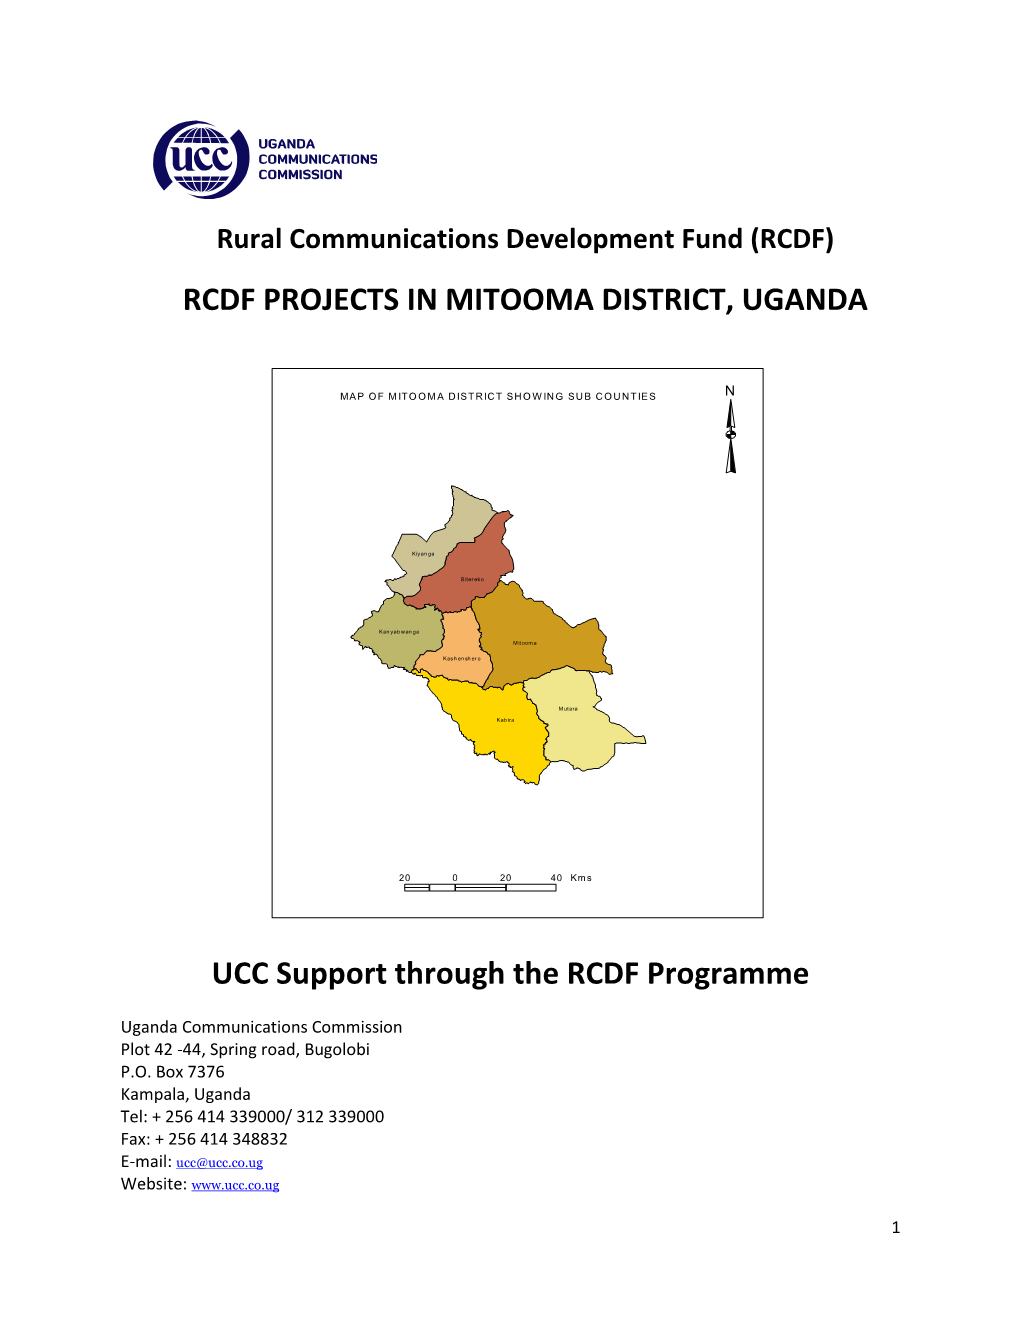 RCDF PROJECTS in MITOOMA DISTRICT, UGANDA UCC Support